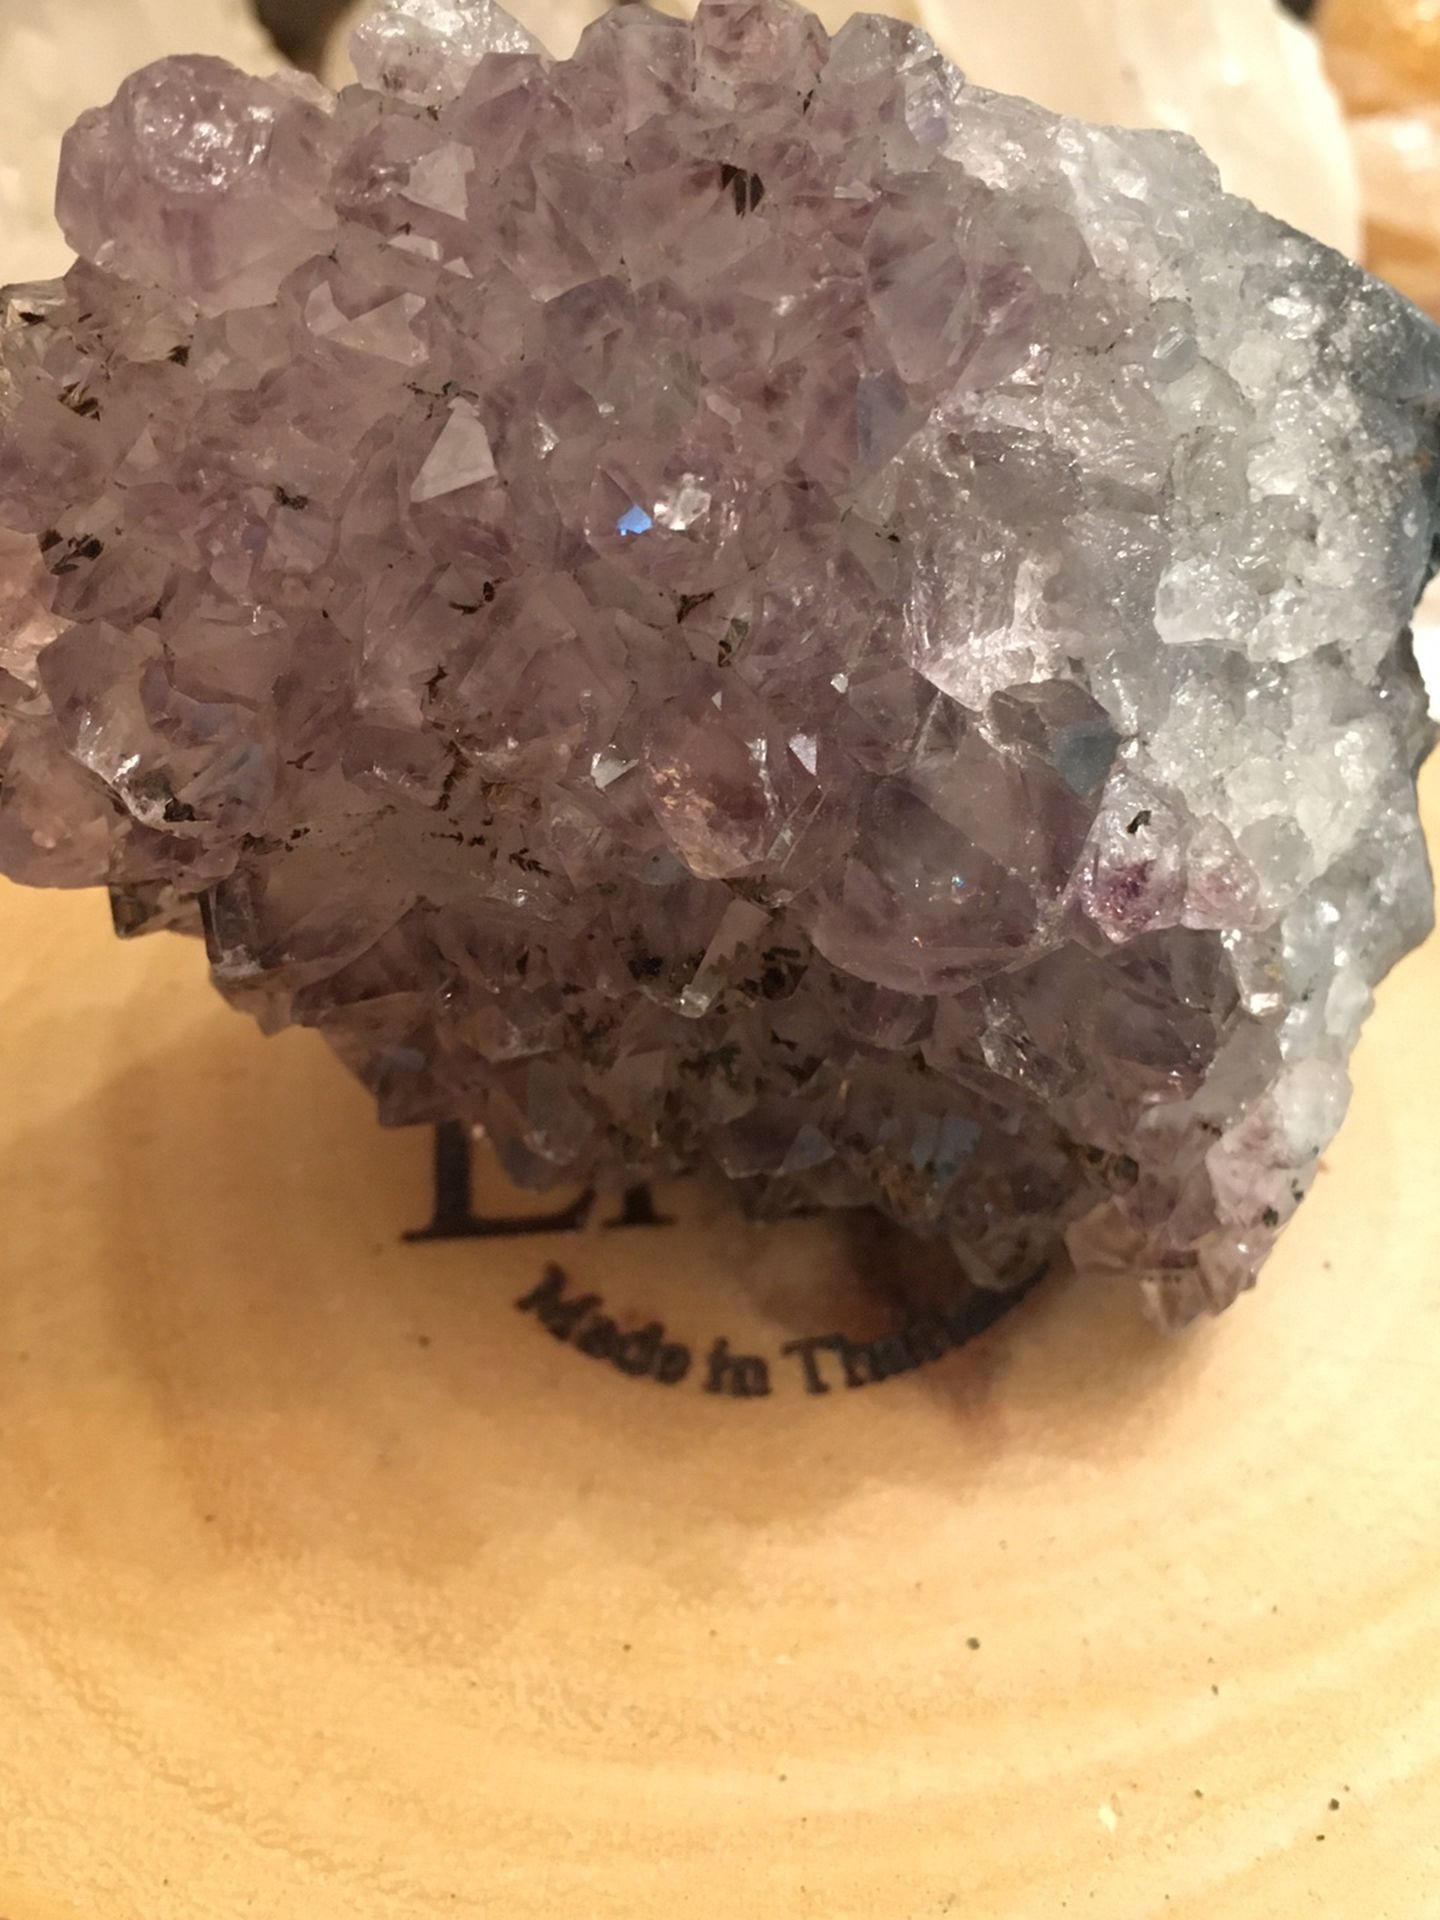 Amethyst With super 7 Goethite Inclusion